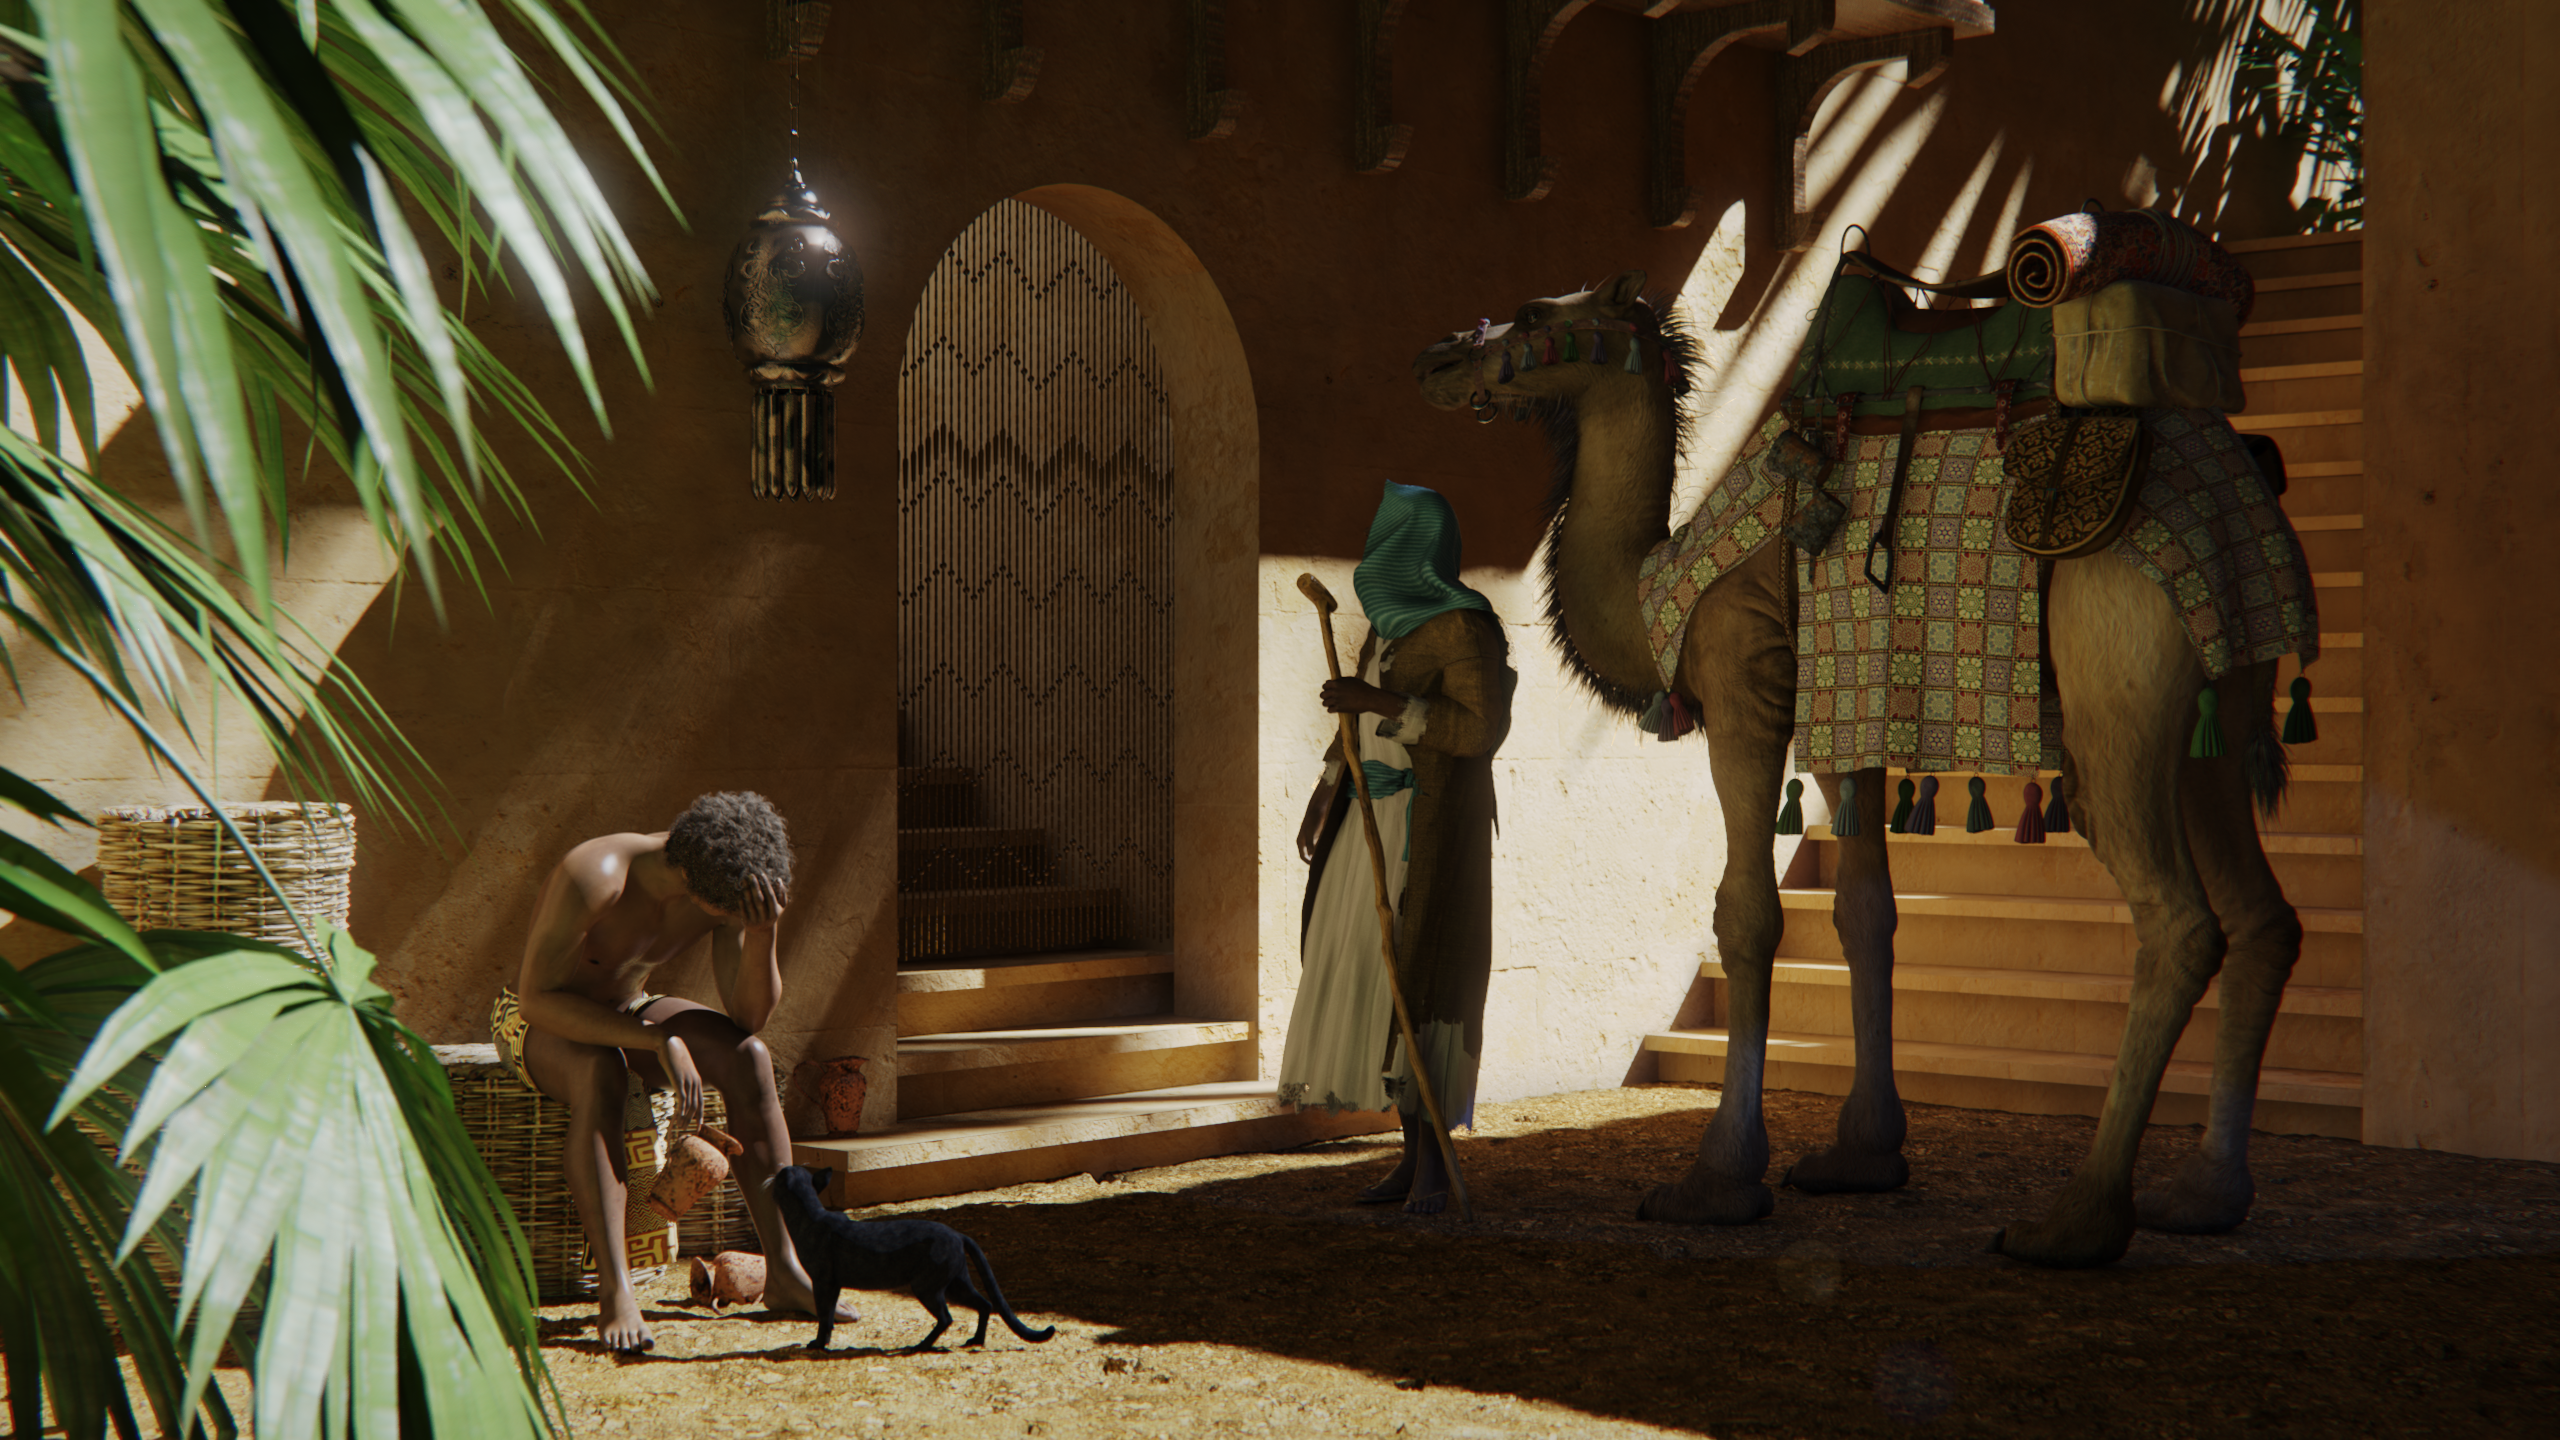 General 2560x1440 camels stairs palm trees plants cats robes CGI digital art shadow